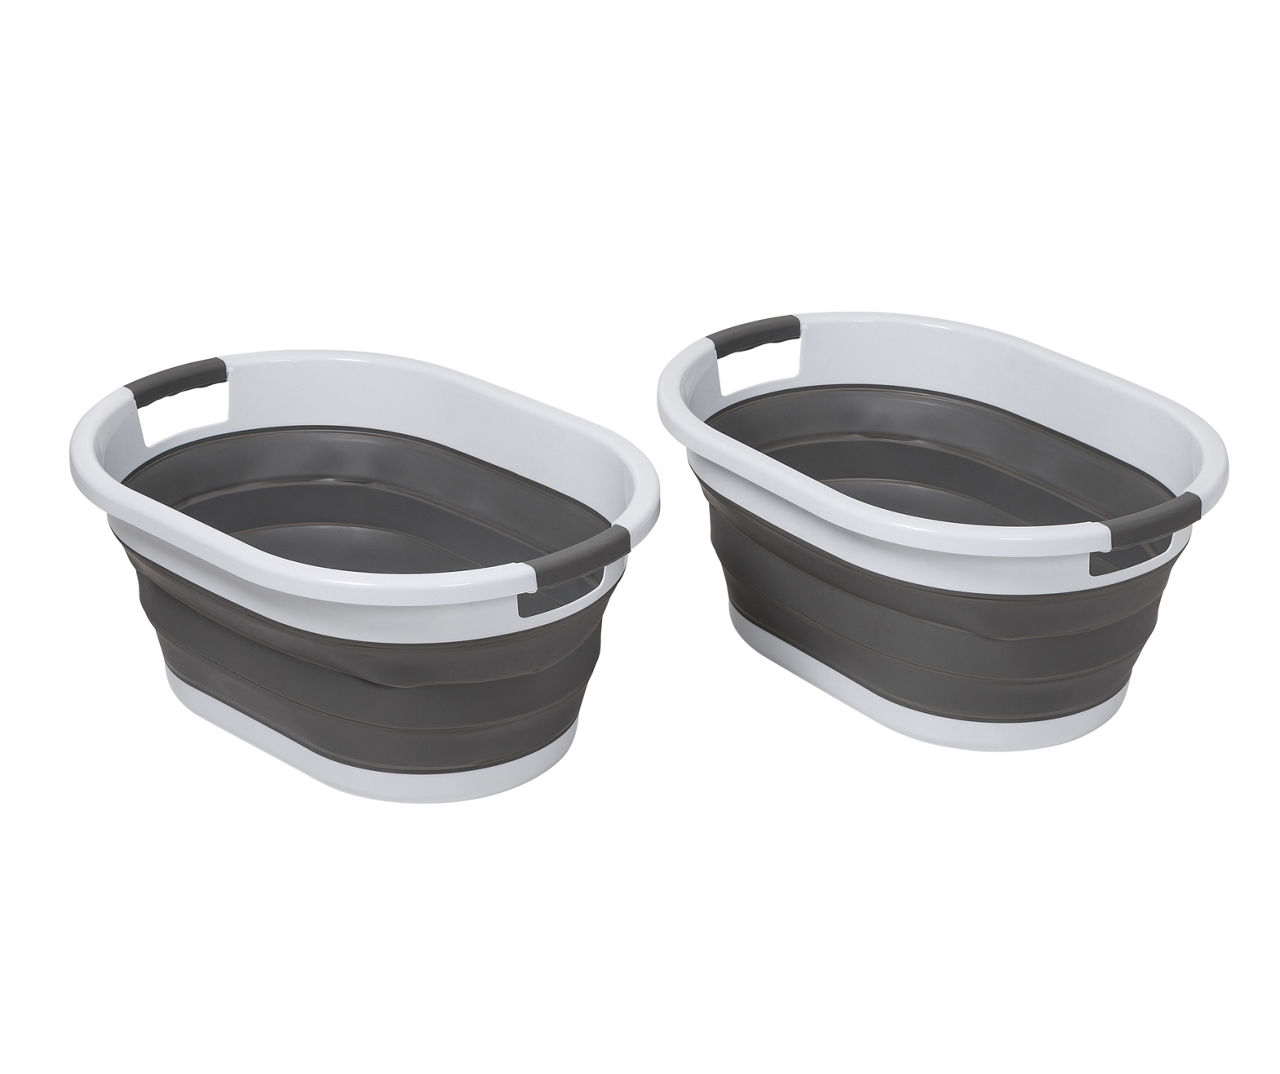 Honey-Can-Do Dark Gray & White Collapsible Laundry Baskets, 2-Pack